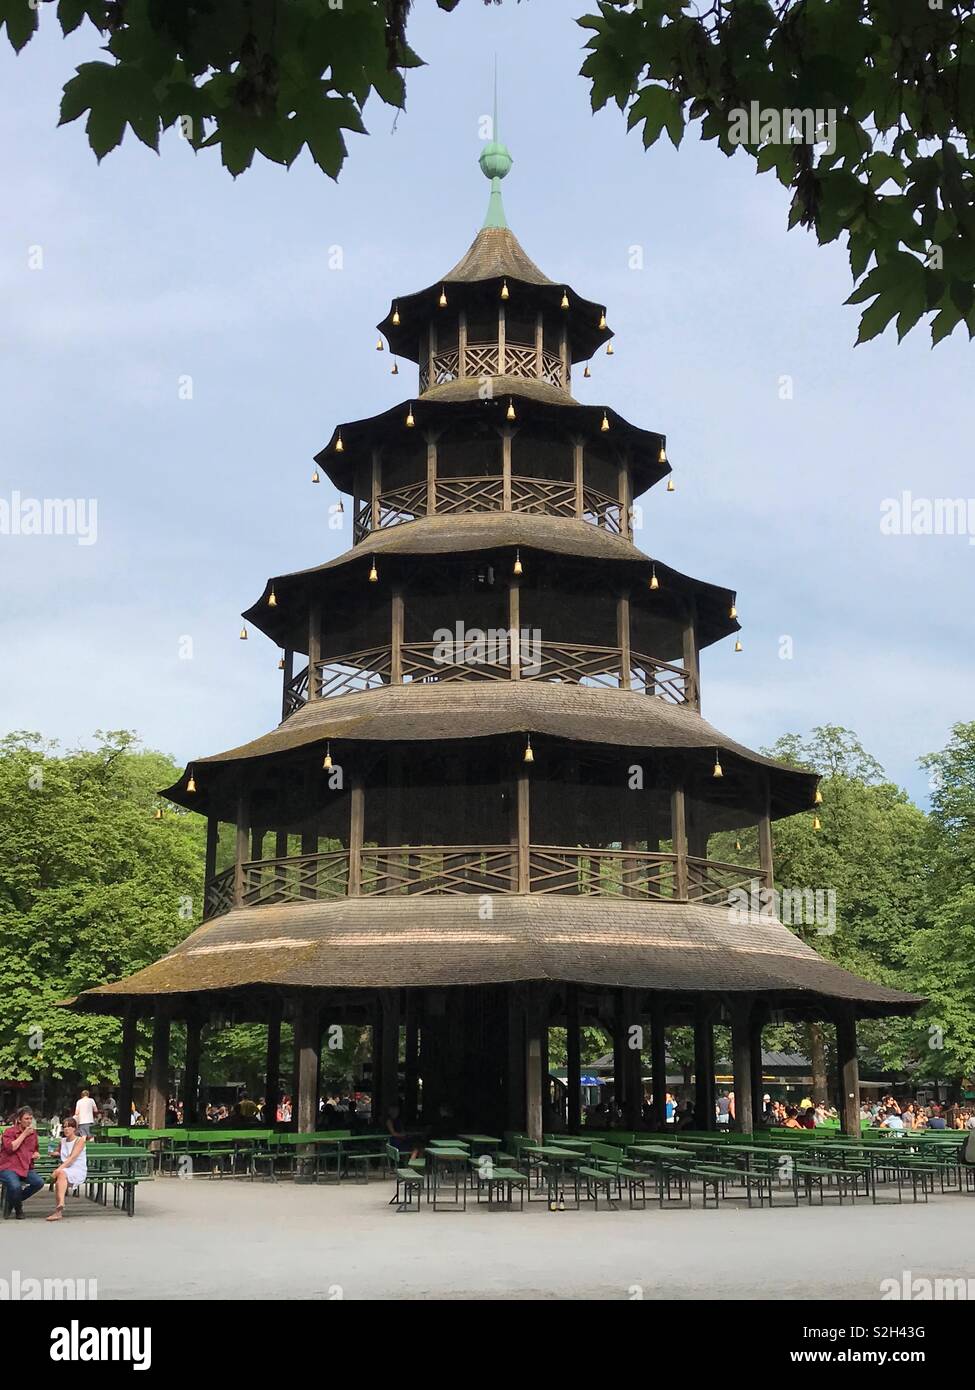 Munich, Germany - June 22, 2017: The historic Chinese Tower in the English Garden park is shown in a vertical view during a summer afternoon day. Stock Photo